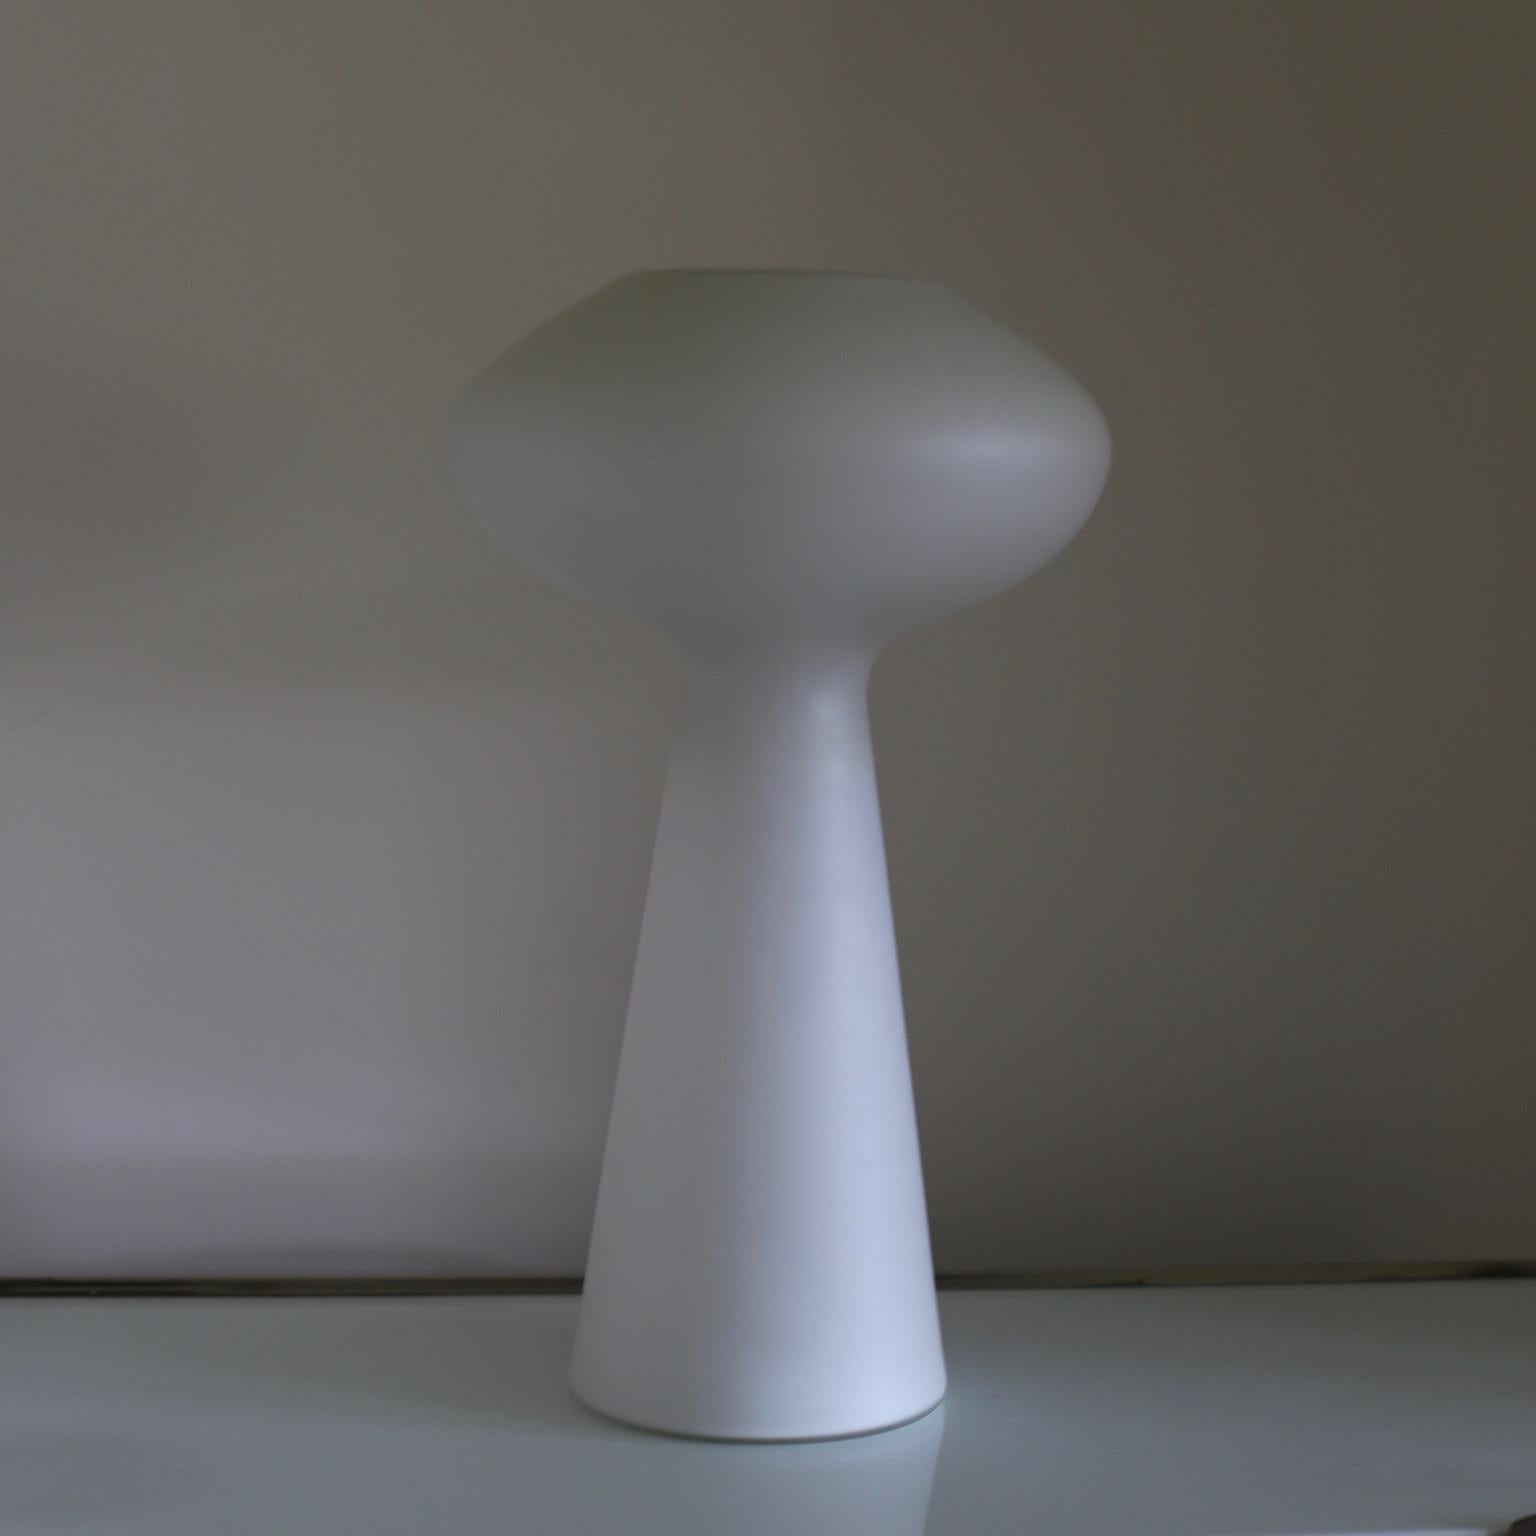 Midcentury Italian frosted glass table lamp a very desirable modern design from the 1960s. Lisa Johannson Pape was a very prominent Finnish designer and this lamp is probably her most iconic piece.